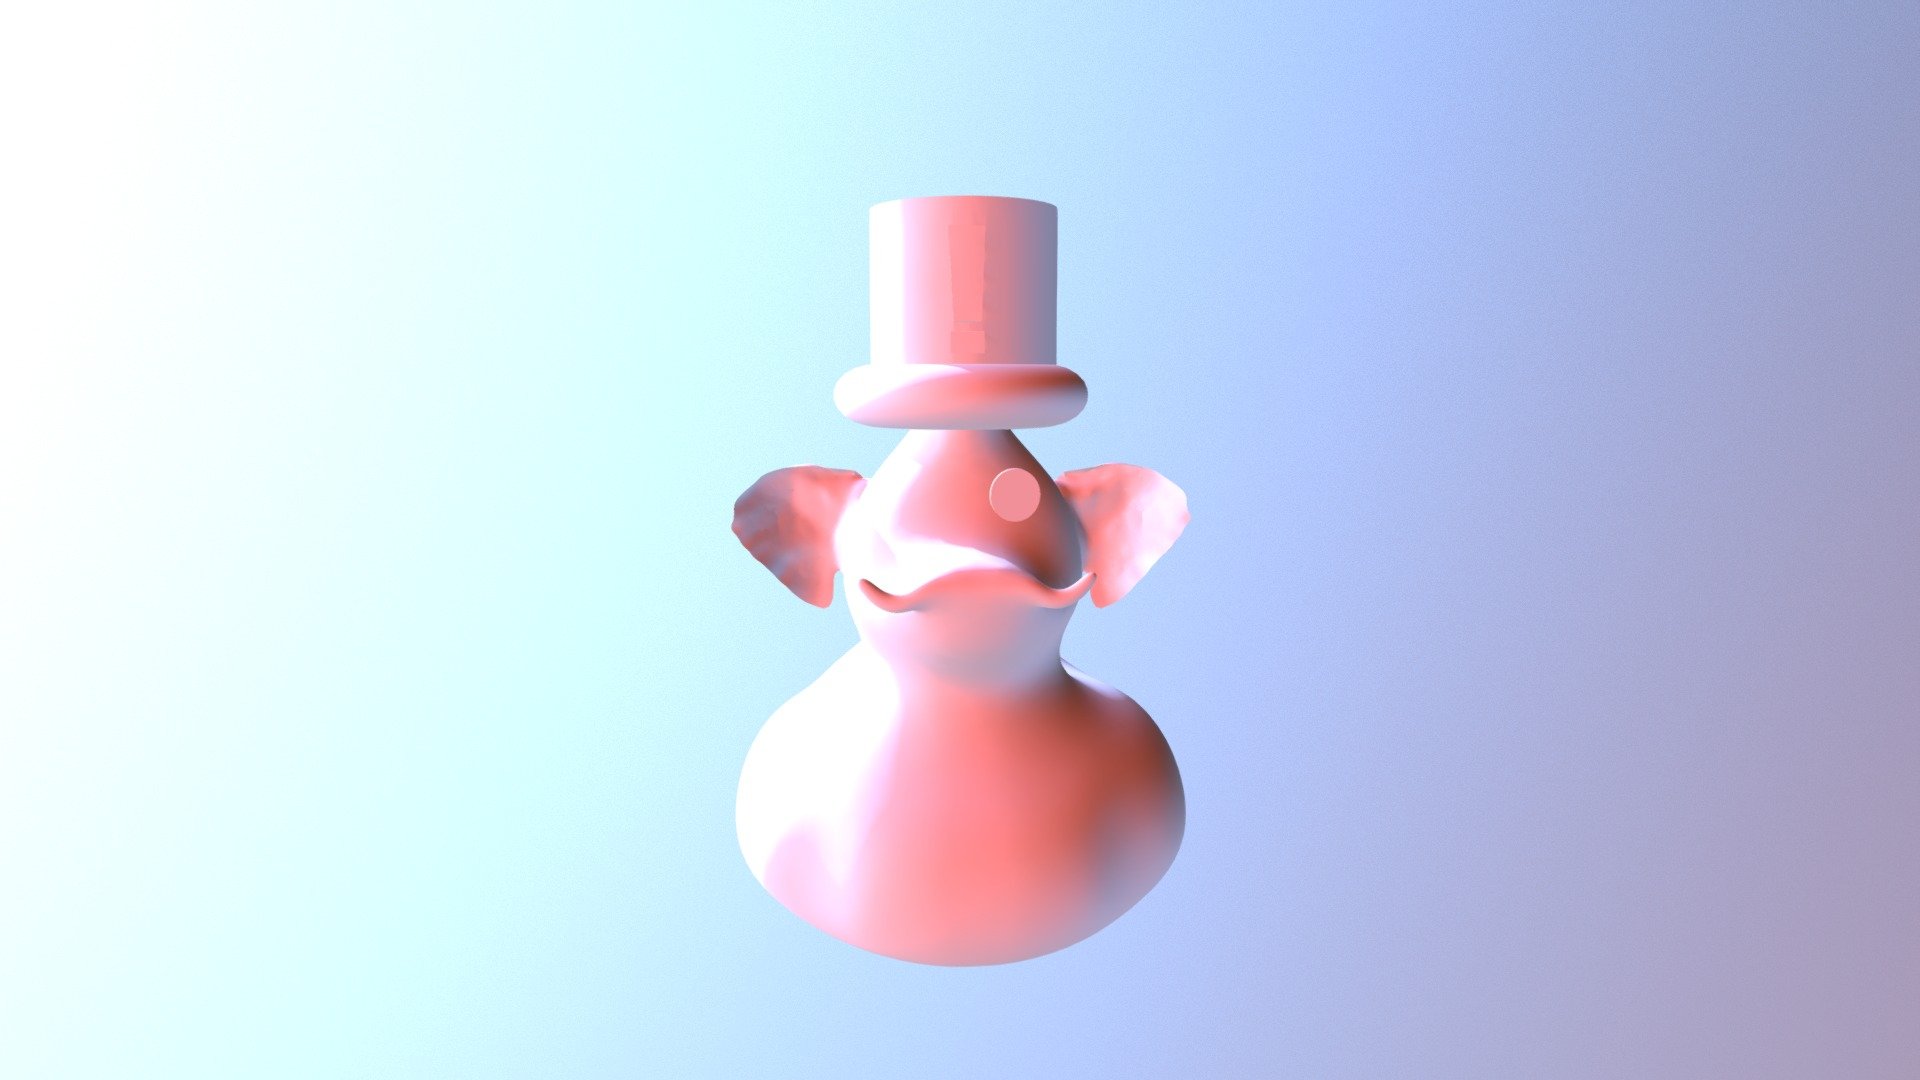 Rubber duck with top hat